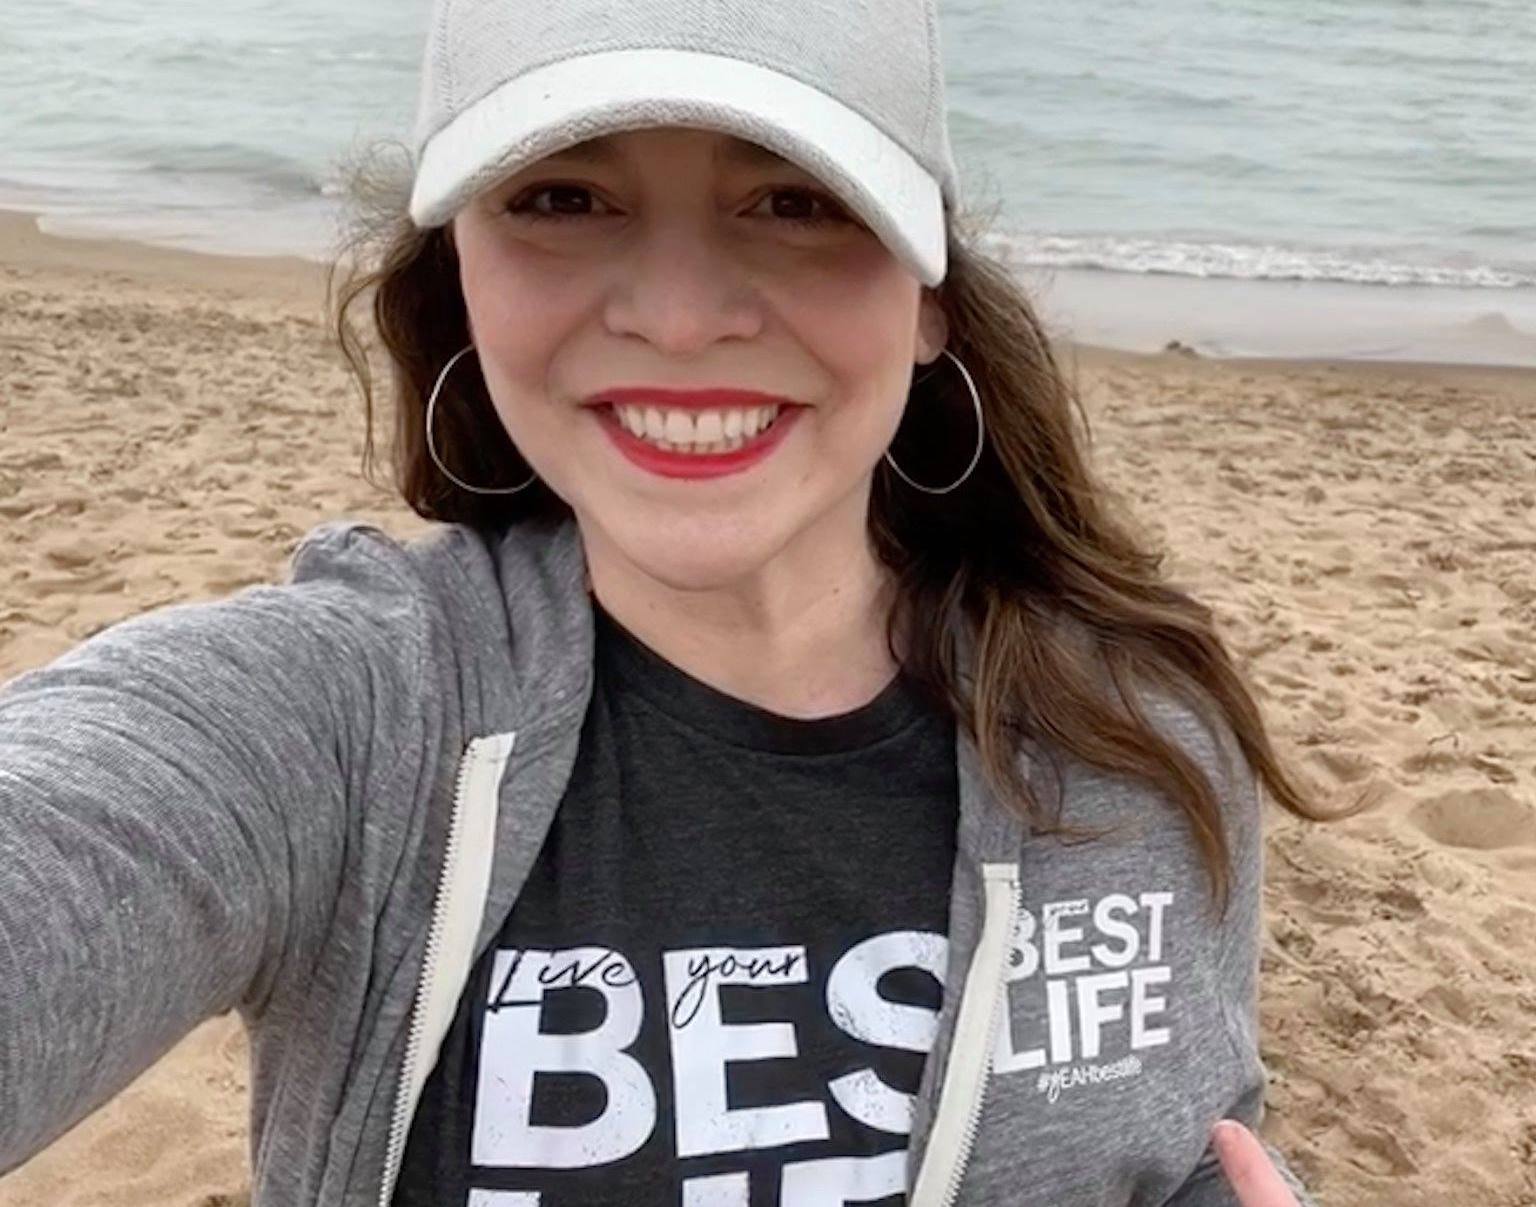 Living her best life… with lung cancer